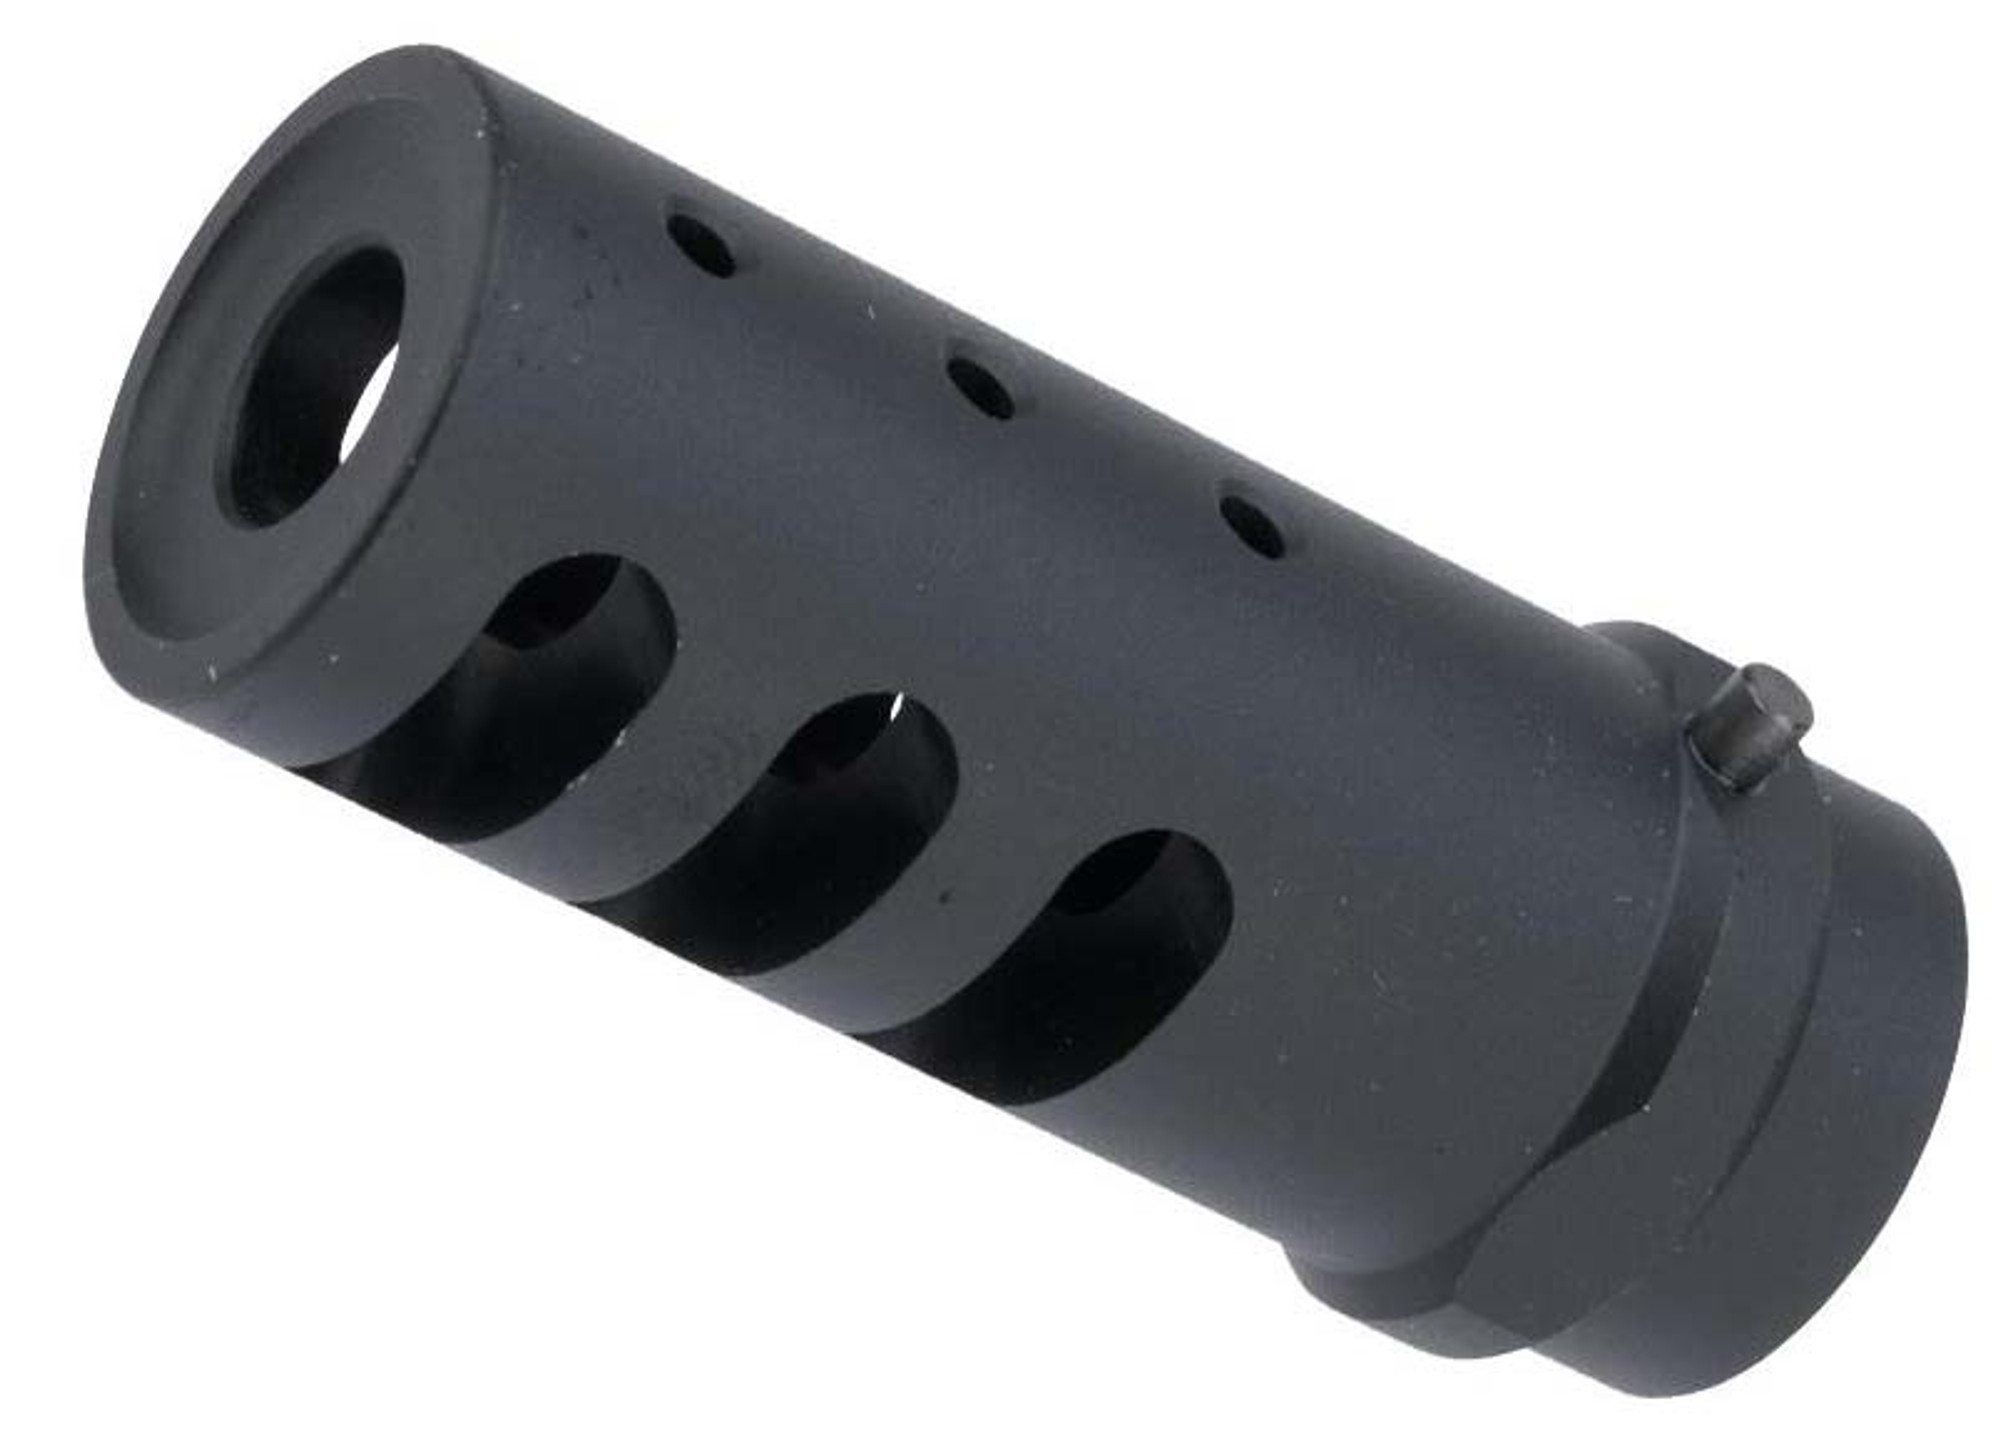 ARES 14mm Positive Blast Shield Flash Hider for Airsoft AEGs